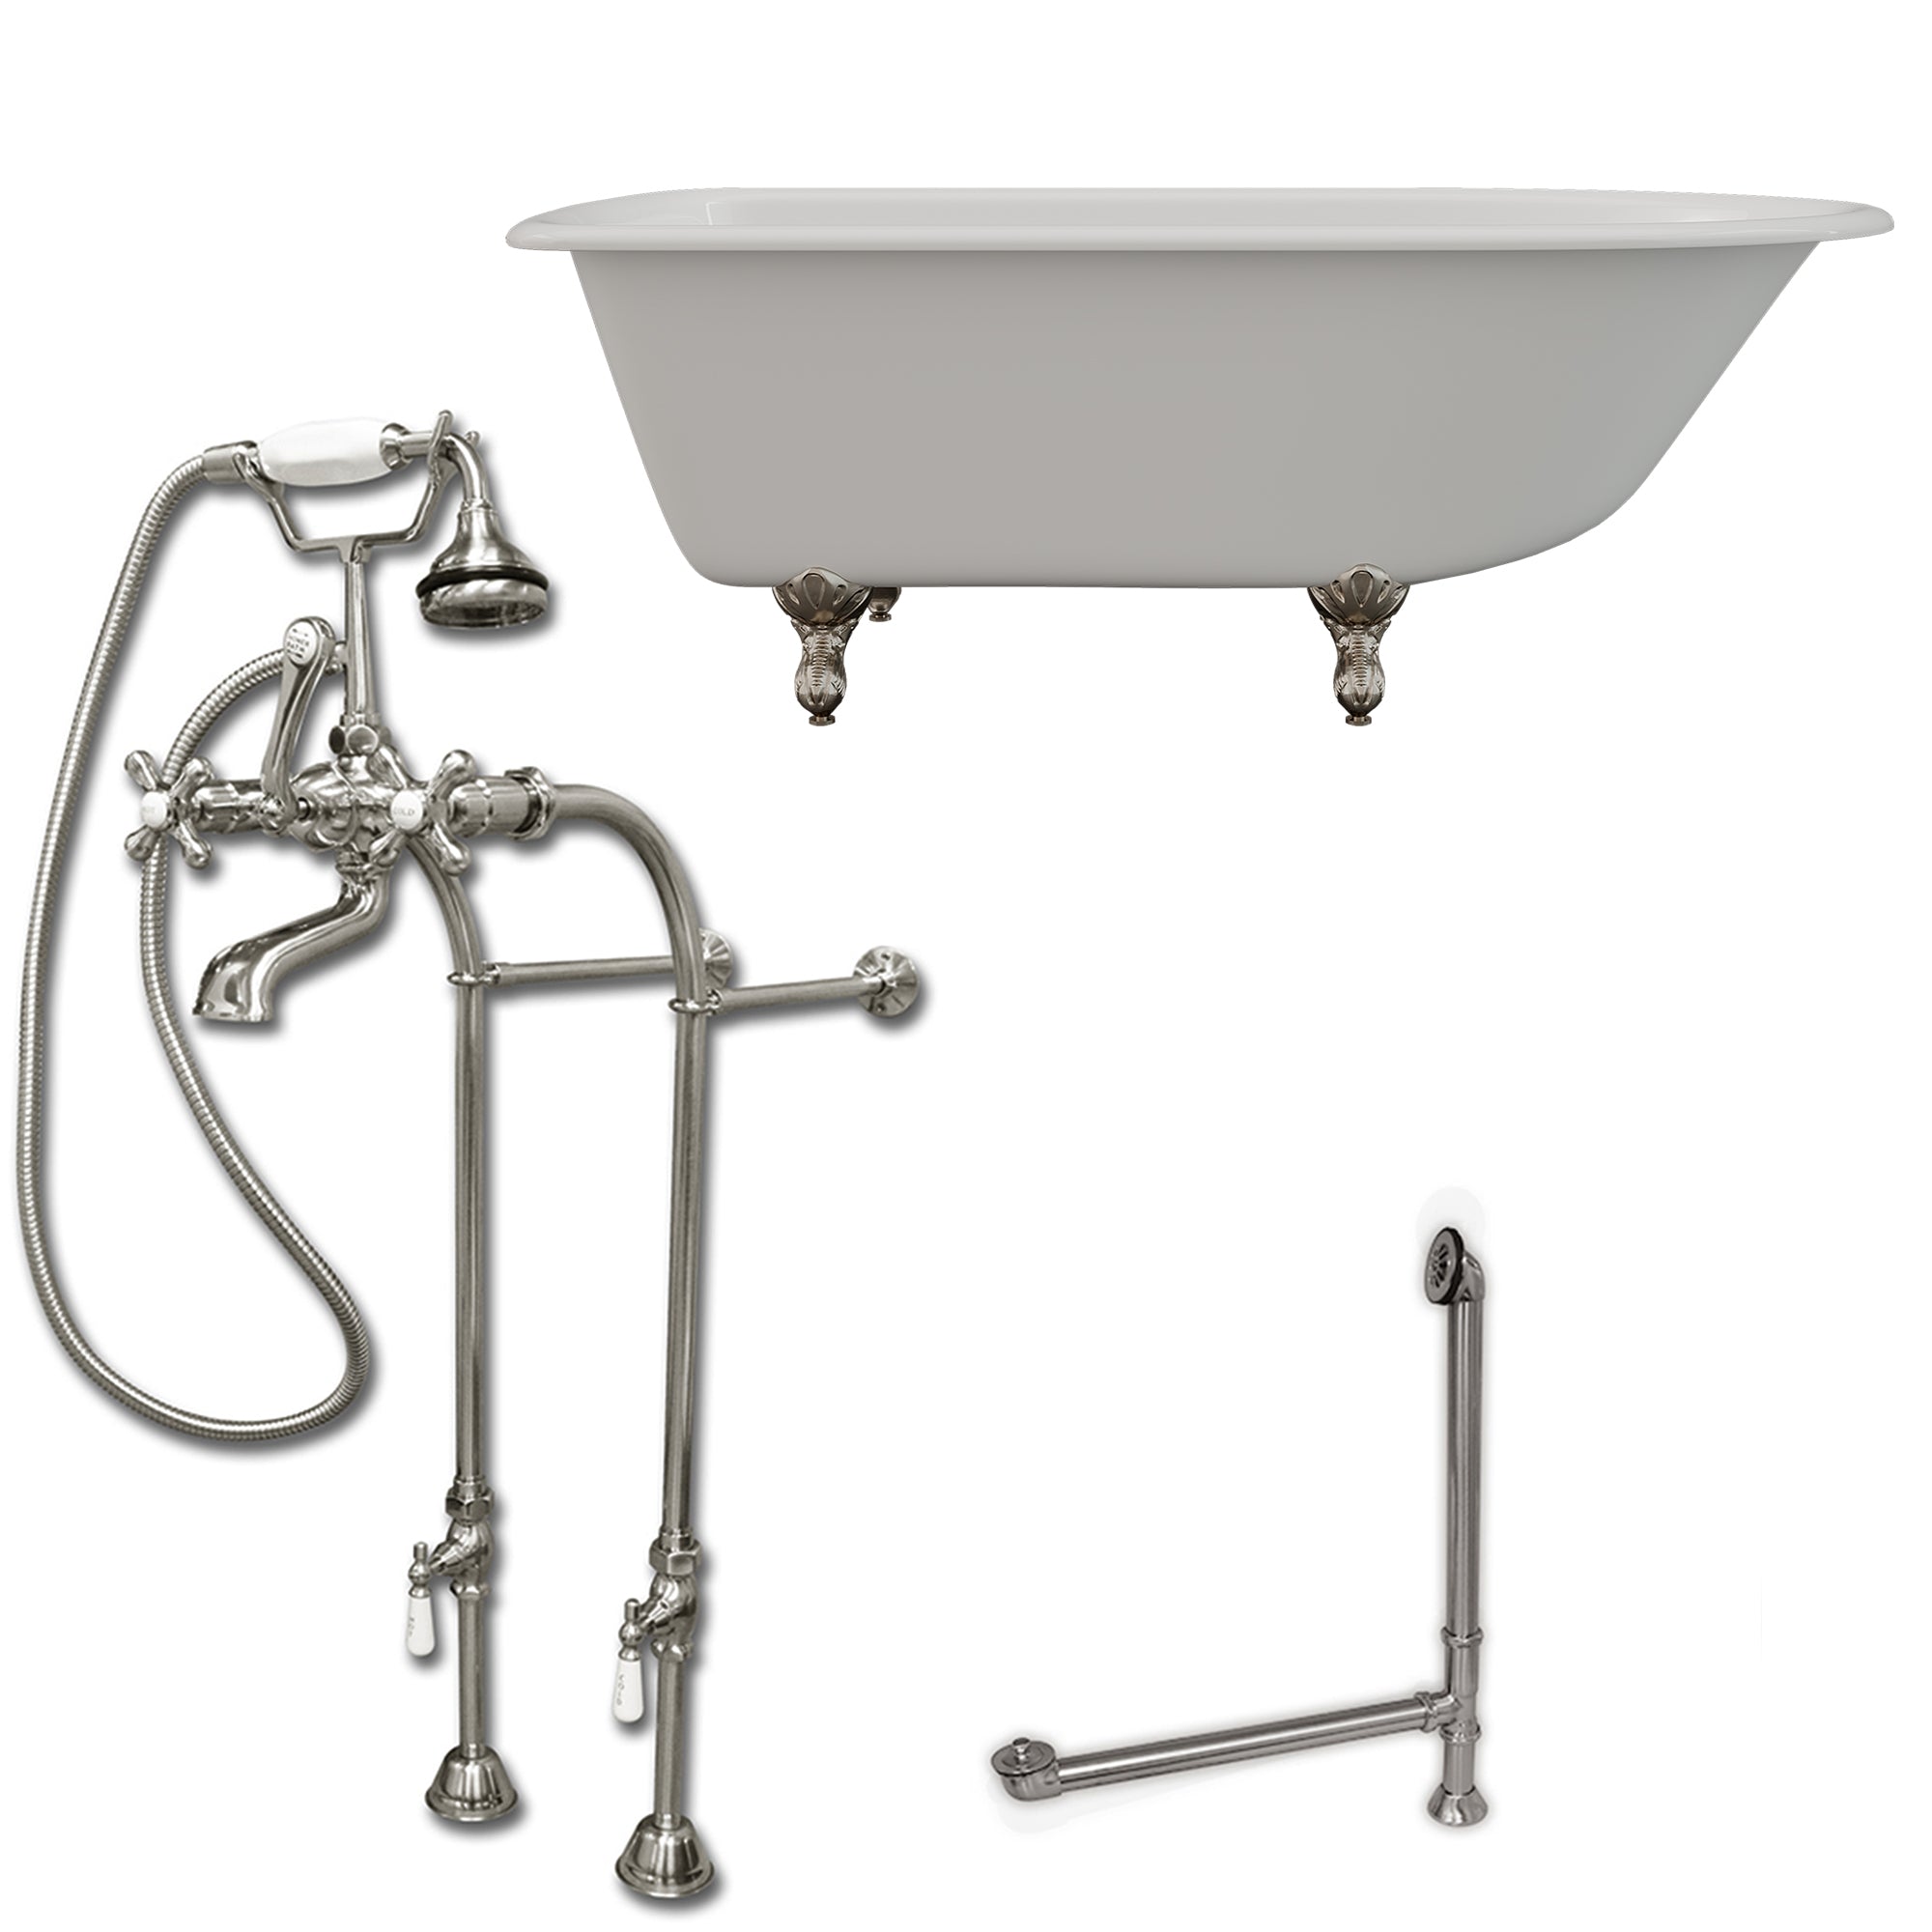 Cambridge Plumbing 60-Inch Rolled Rim Cast Iron Clawfoot Tub (Porcelain enamel interior and white paint exterior) and Freestanding Plumbing Package (Brushed nickel) RR61-398463-PKG-NH - Vital Hydrotherapy